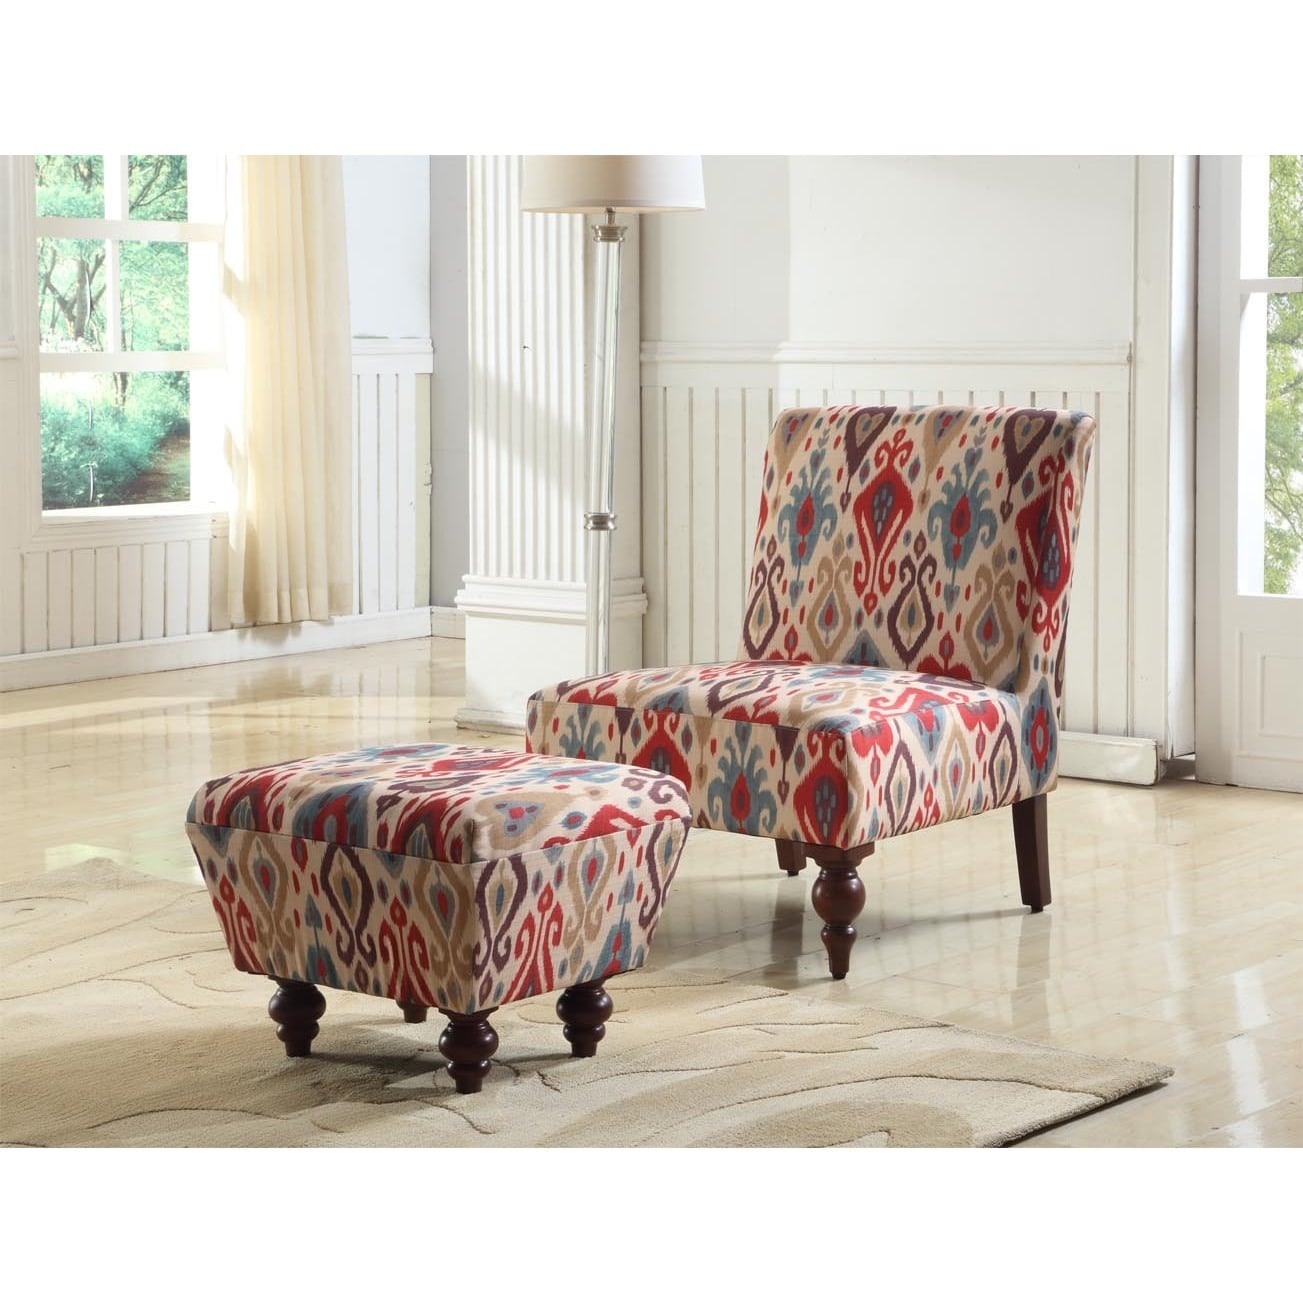 Shop Deluxe Accent Chair/ Ottoman - Free Shipping Today - Overstock